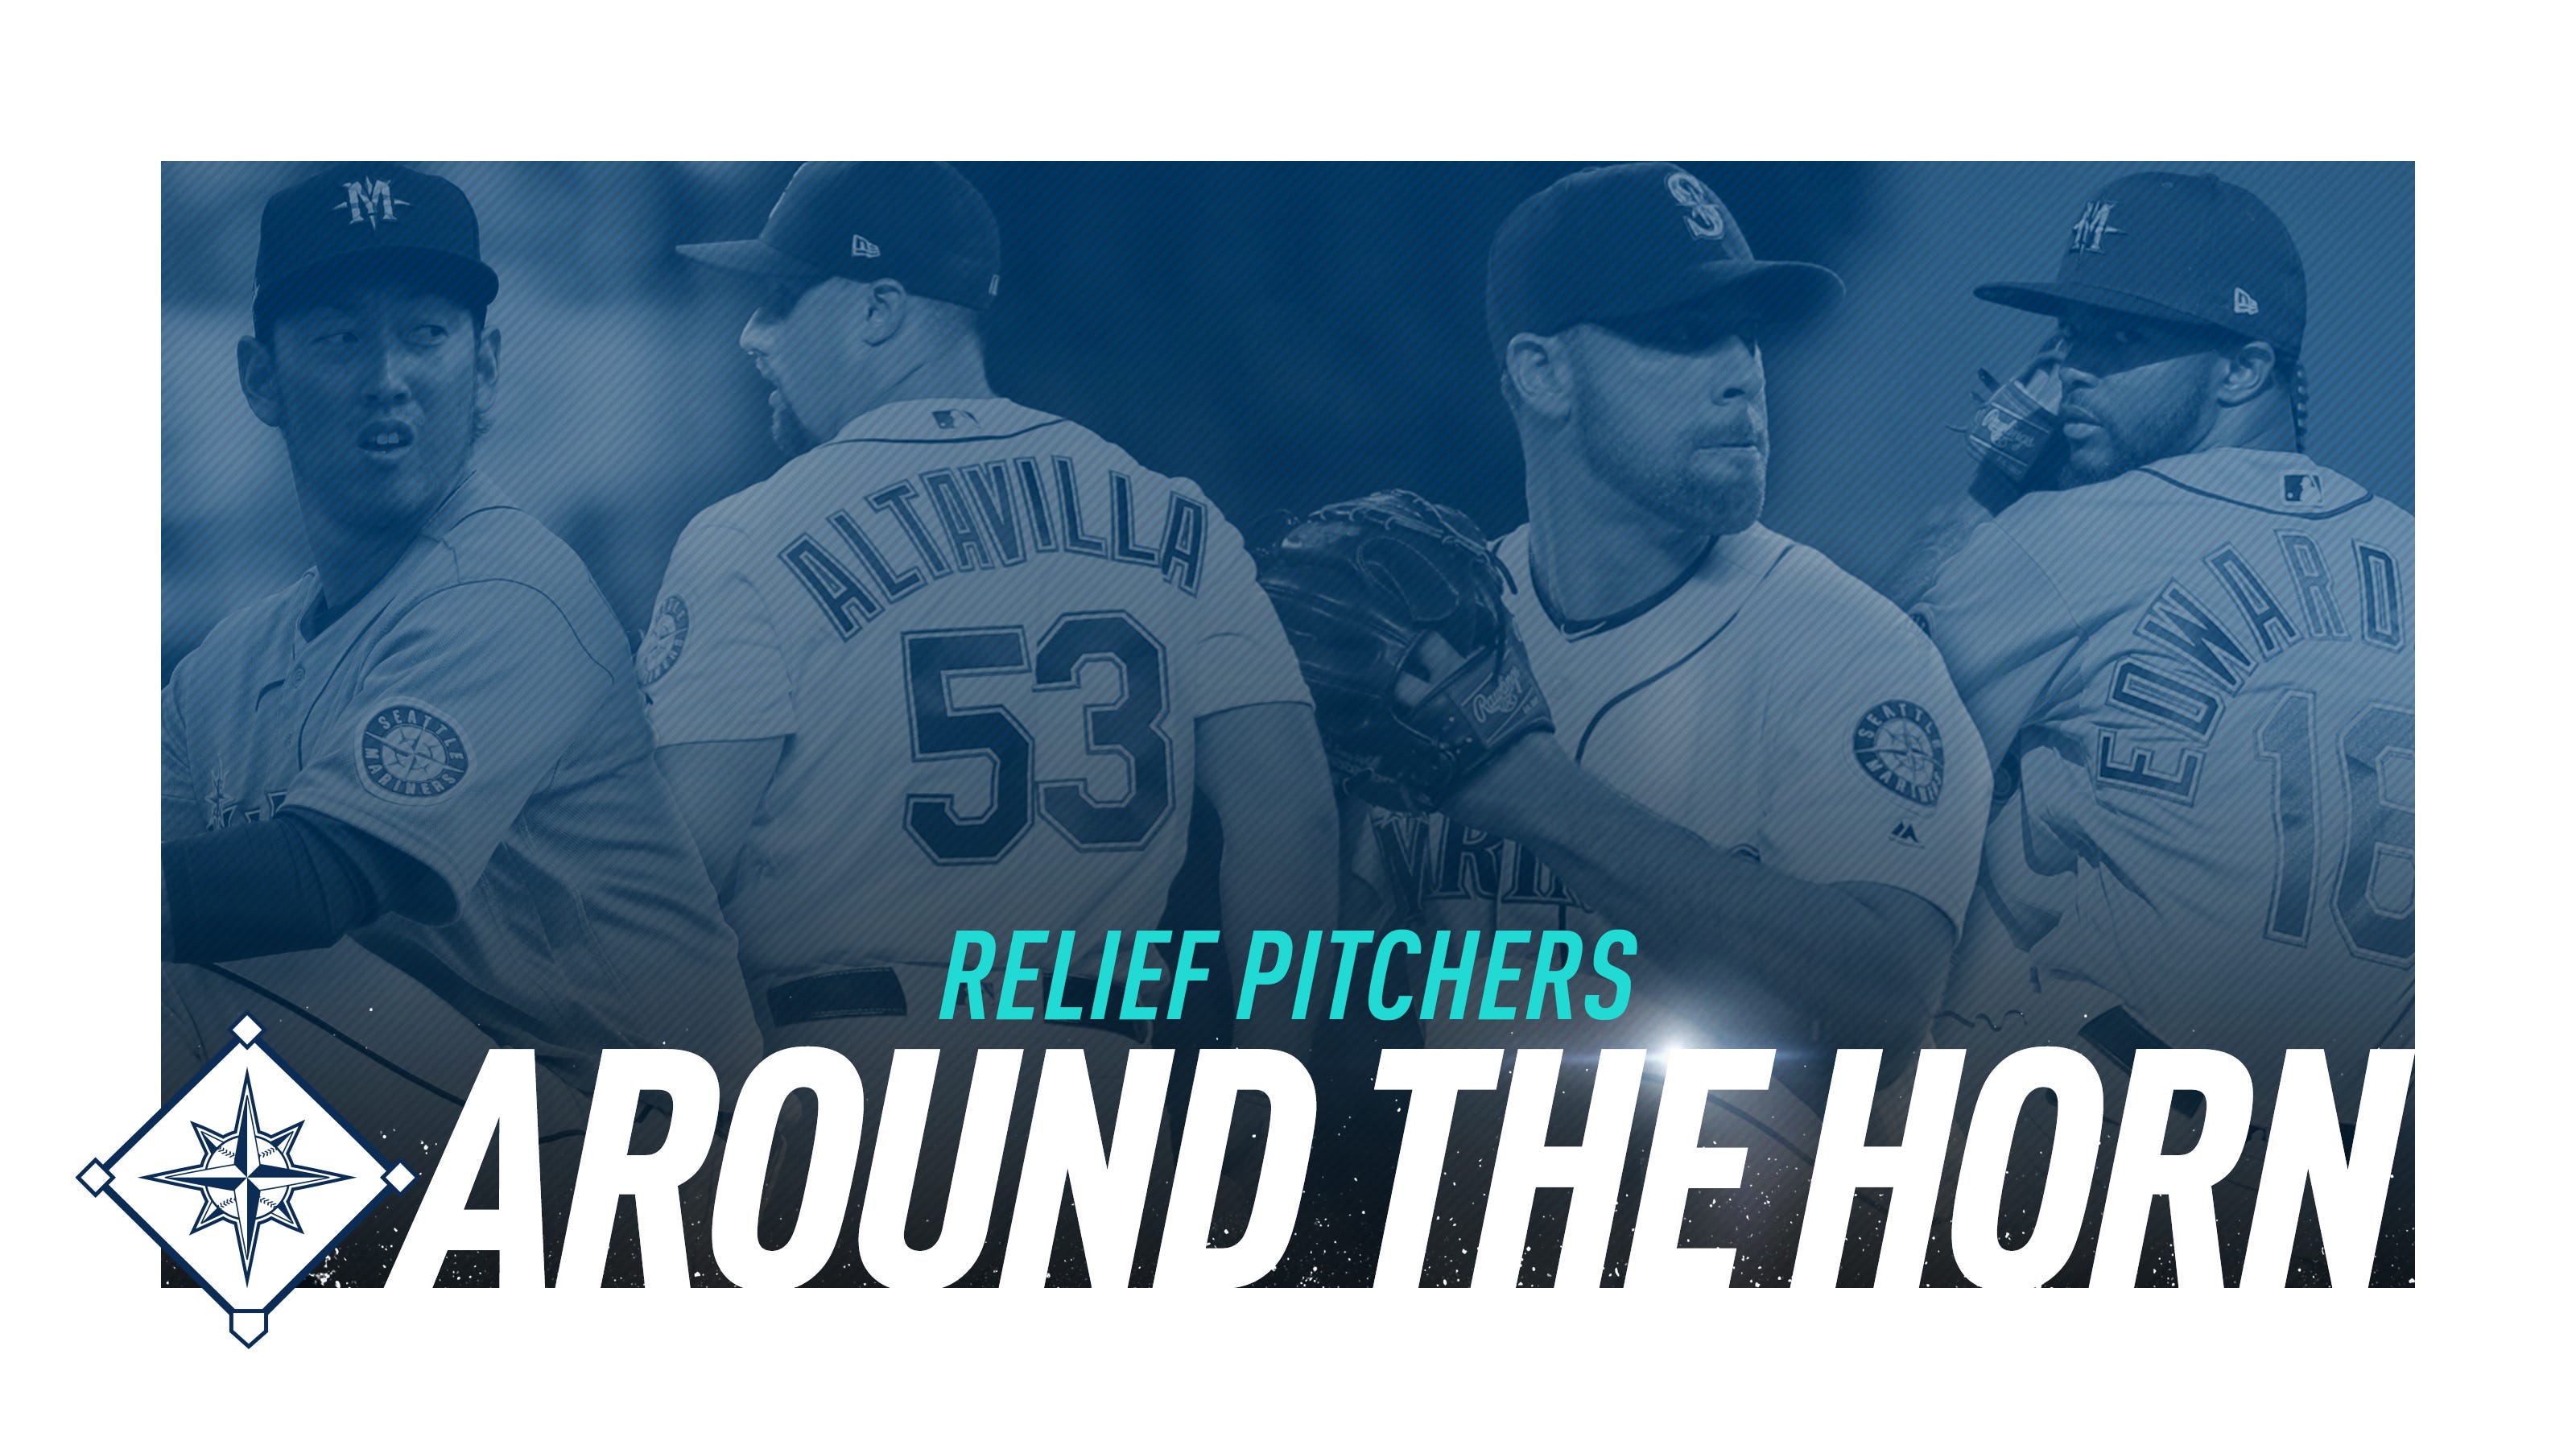 Mariners' all-time best relievers